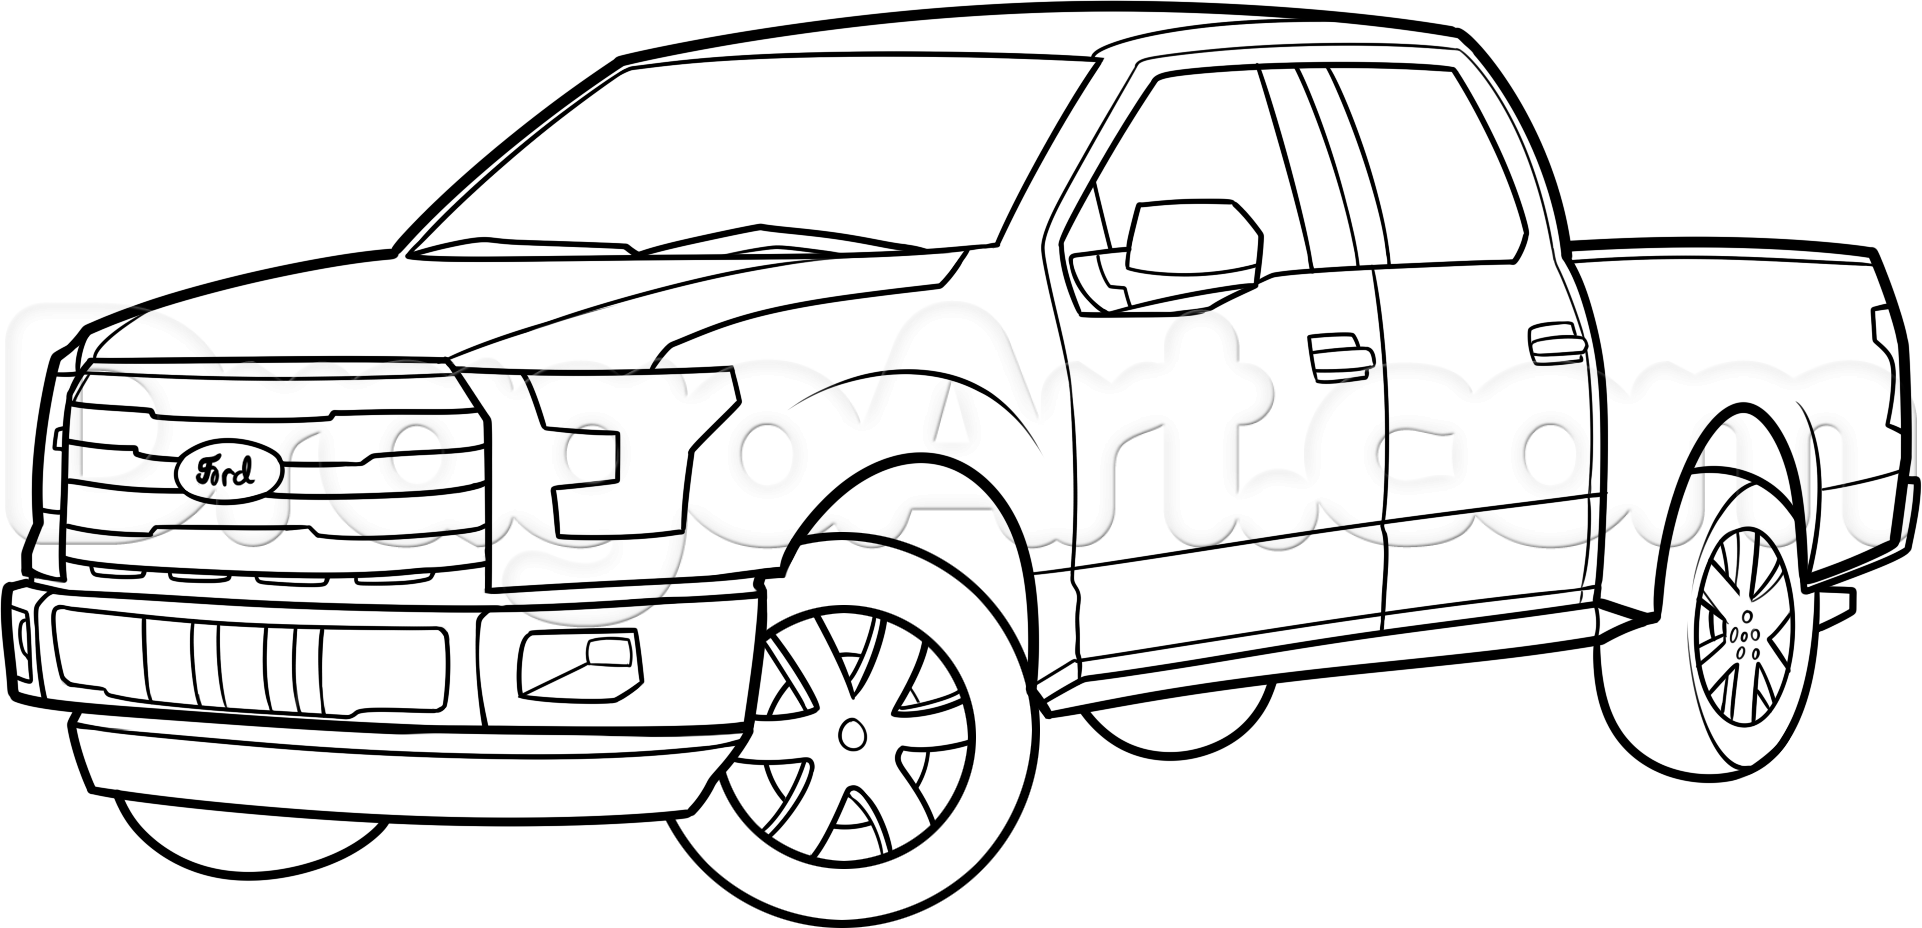 Pickup Truck Coloring Pages Printable at GetColorings.com | Free